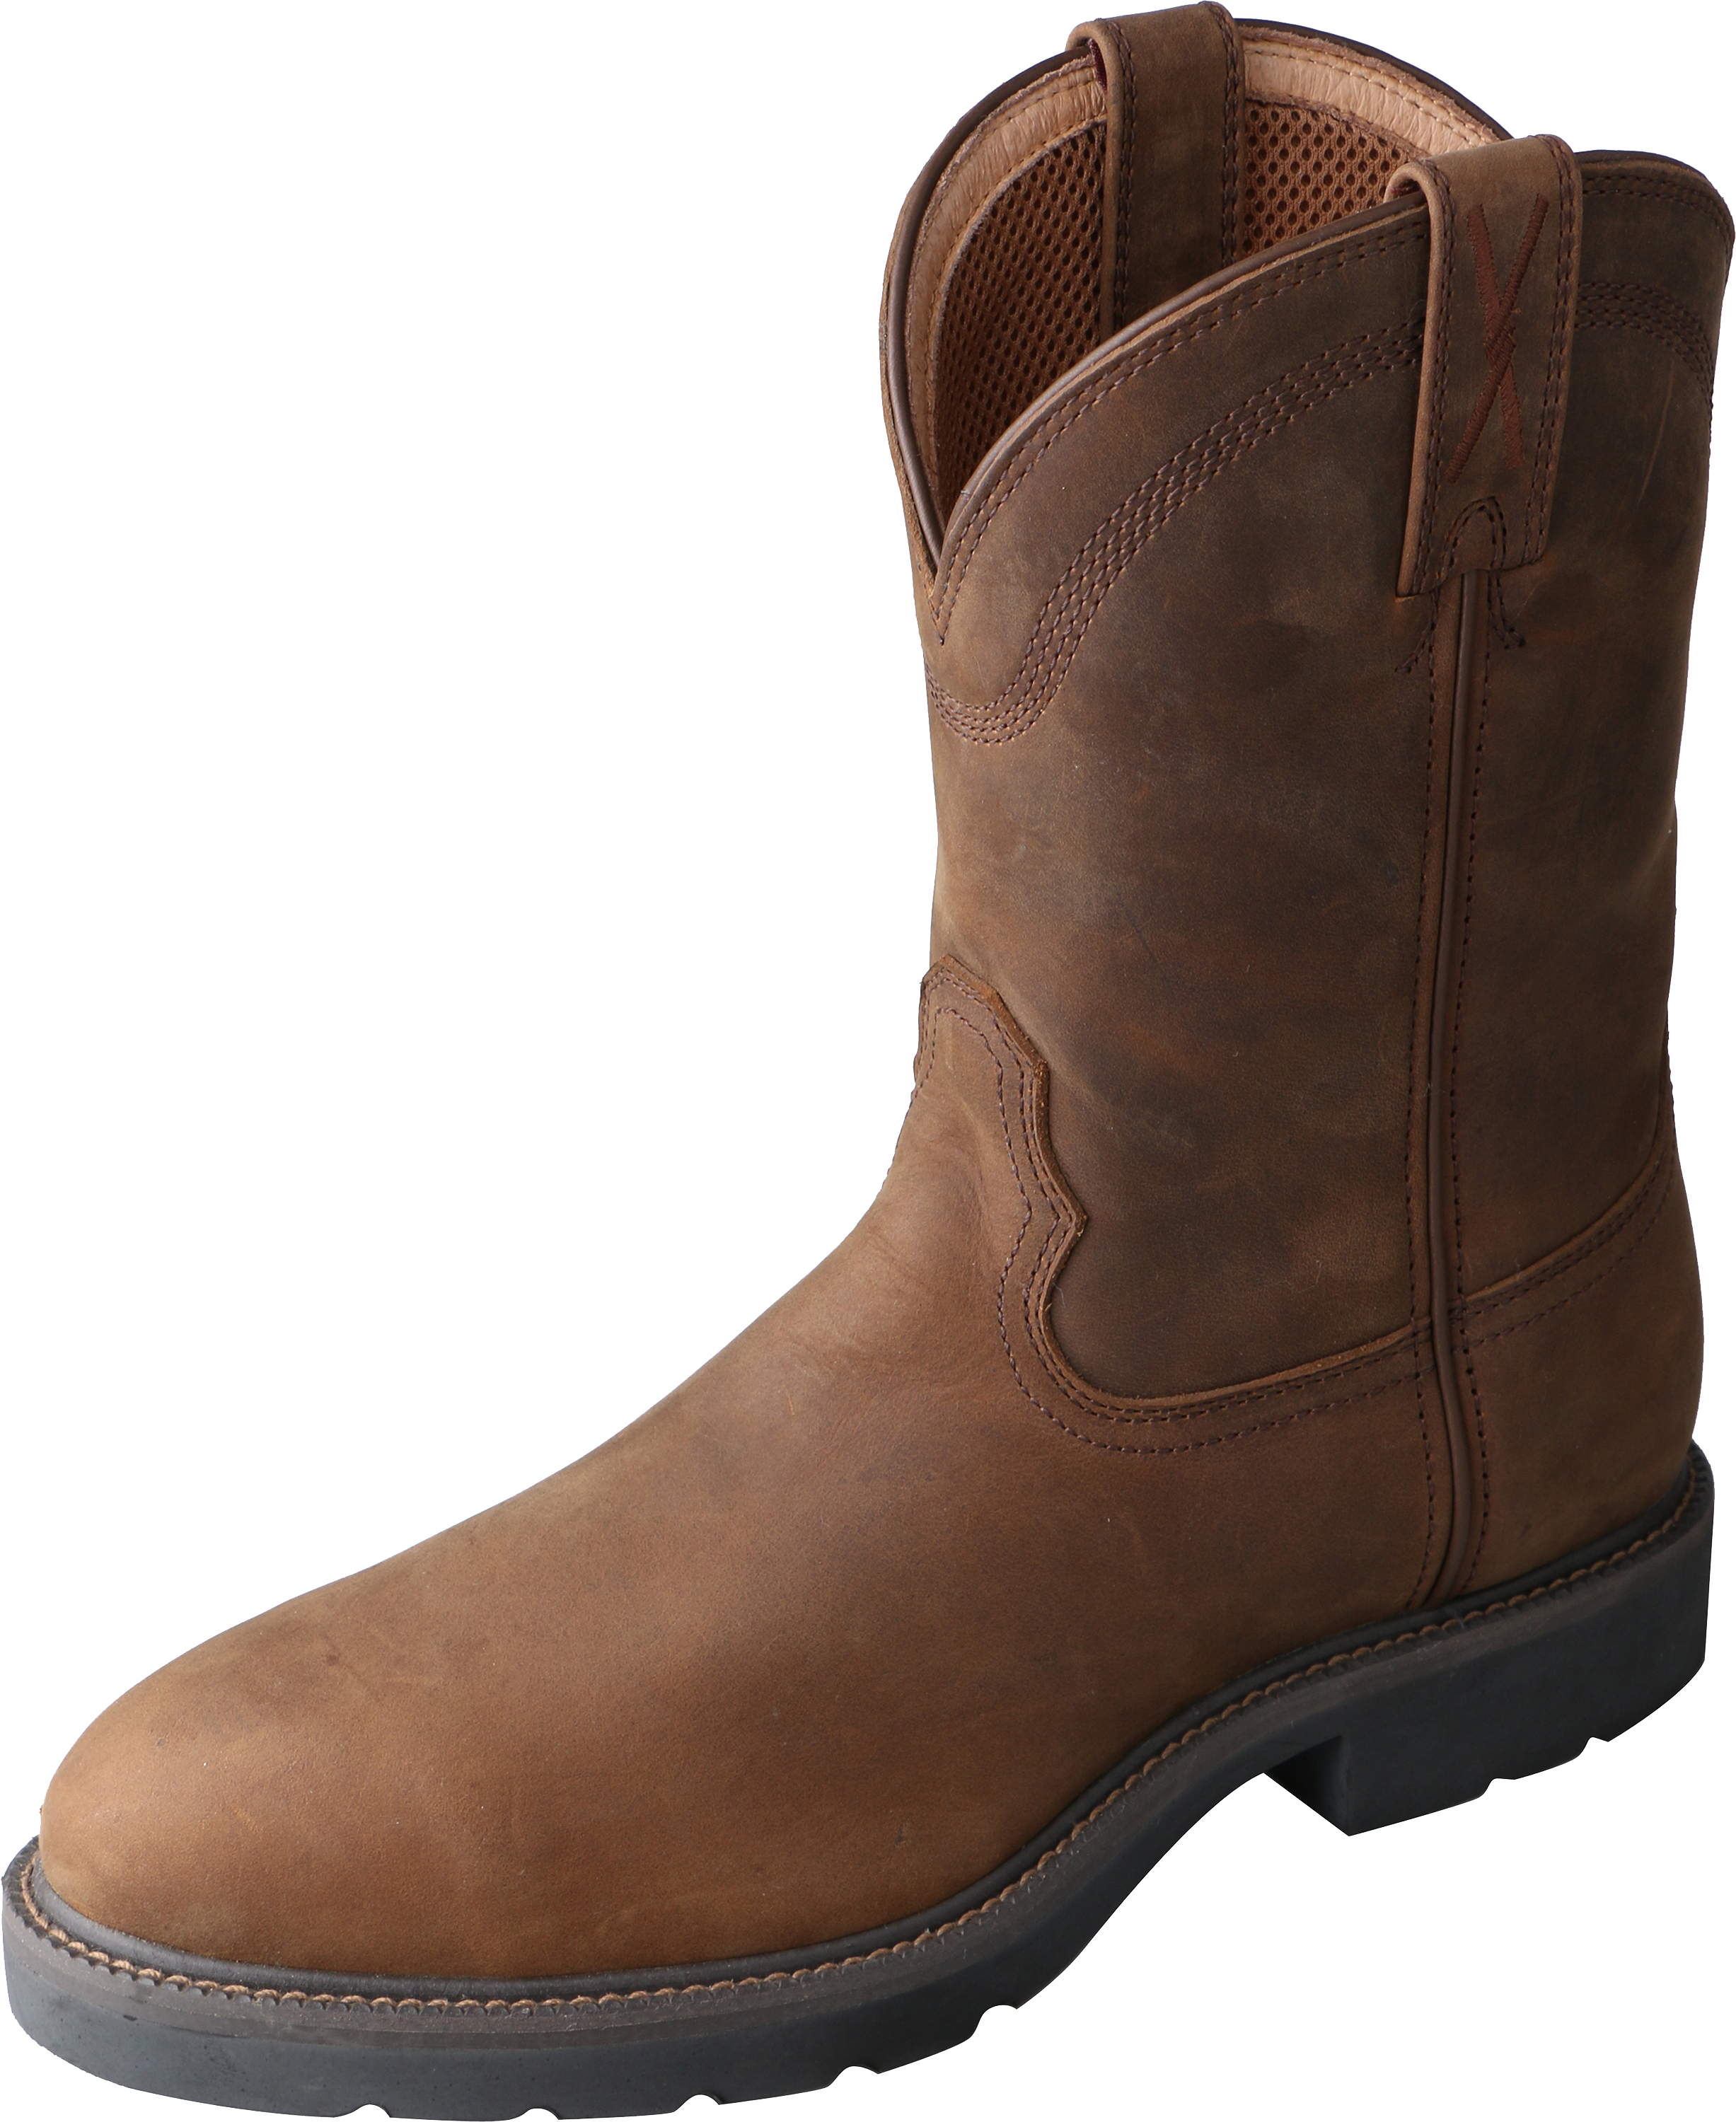 Twisted X Round Toe Western Work Boots for Men